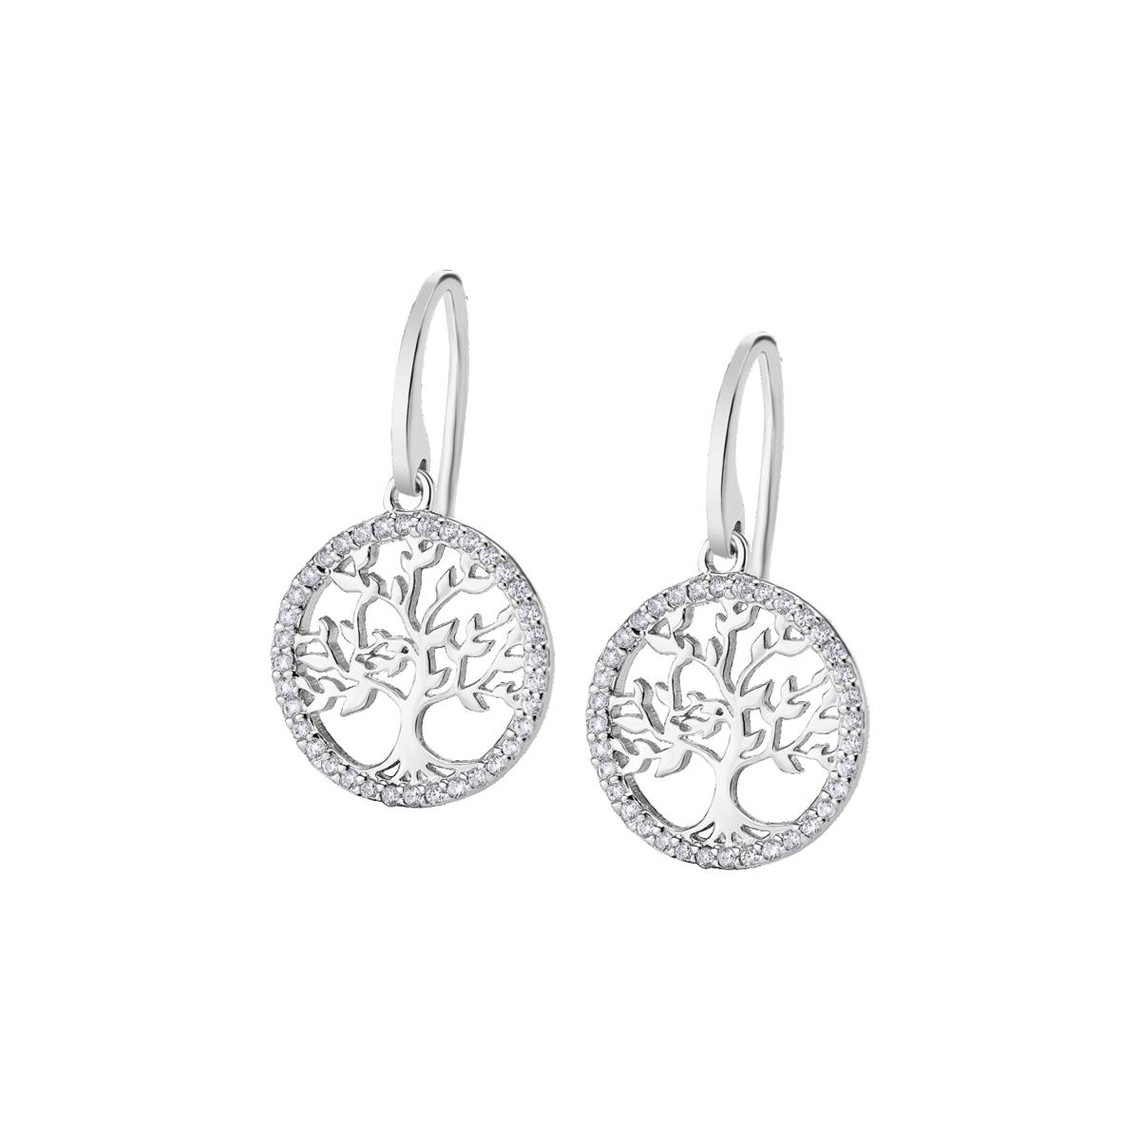 Boucles d'oreilles Lotus Silver TREE OF LIFE LP1746-4-1 - Boucles d'oreilles TREE OF LIFE Argent Lot